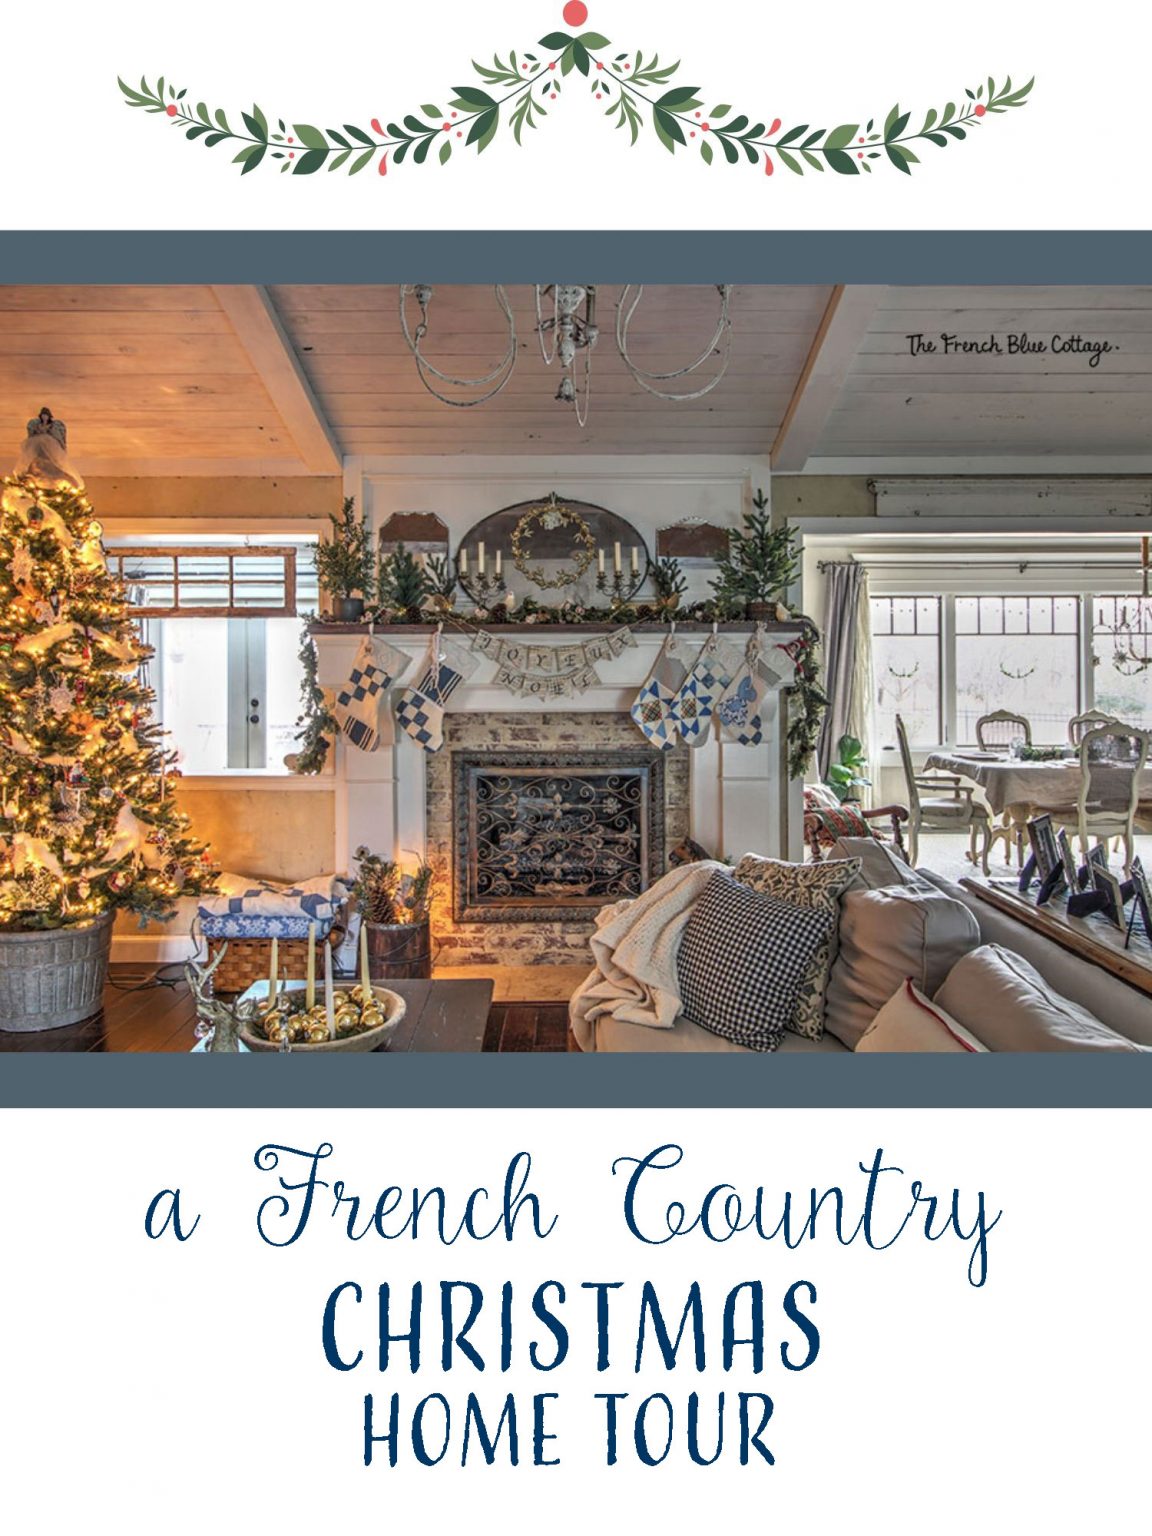 French Country Christmas Decor: Holiday Home 2019 • French Blue Cottage